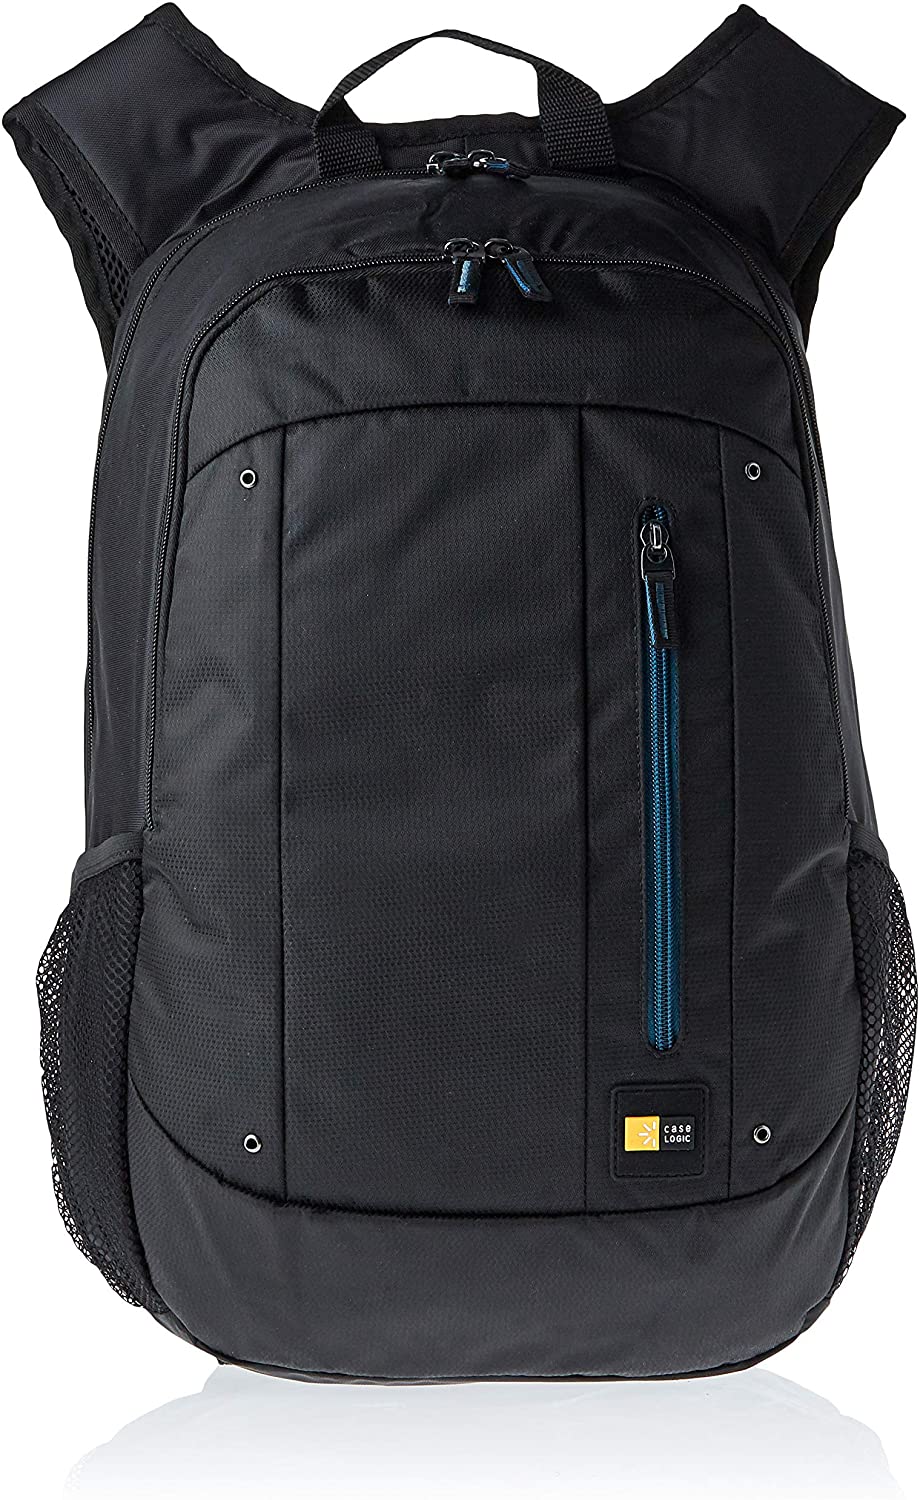 CASE LOGIC JAUNT BACKPACK WMBP-115 for up to 15.6" Laptop + Tablet (CLASSIC BLACK)